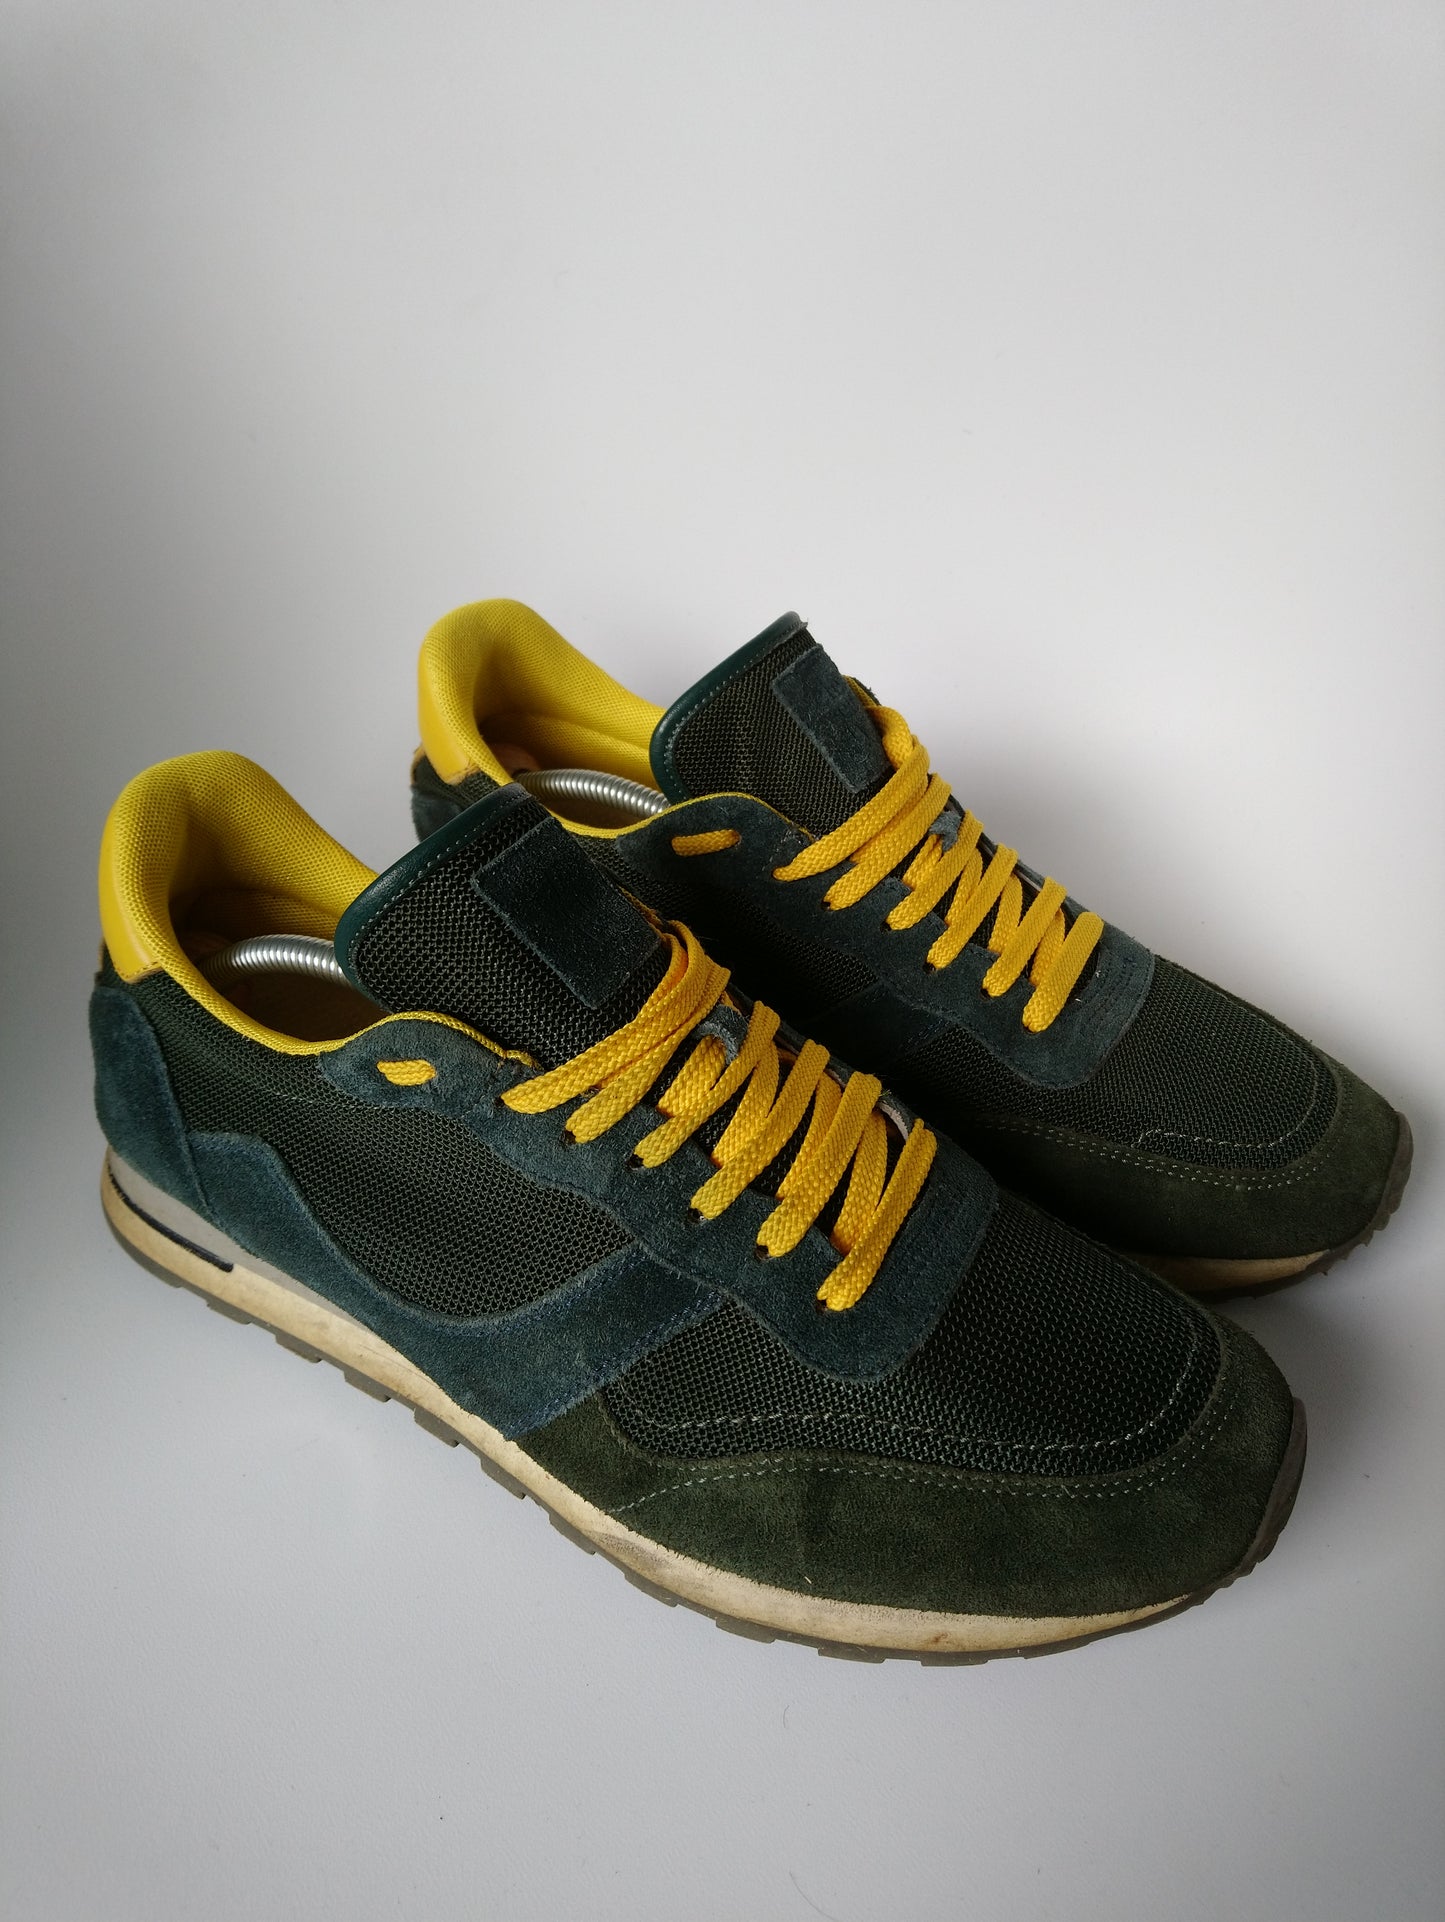 Eleventy / 11ty sneakers. Dark green yellow colored. Size 43.